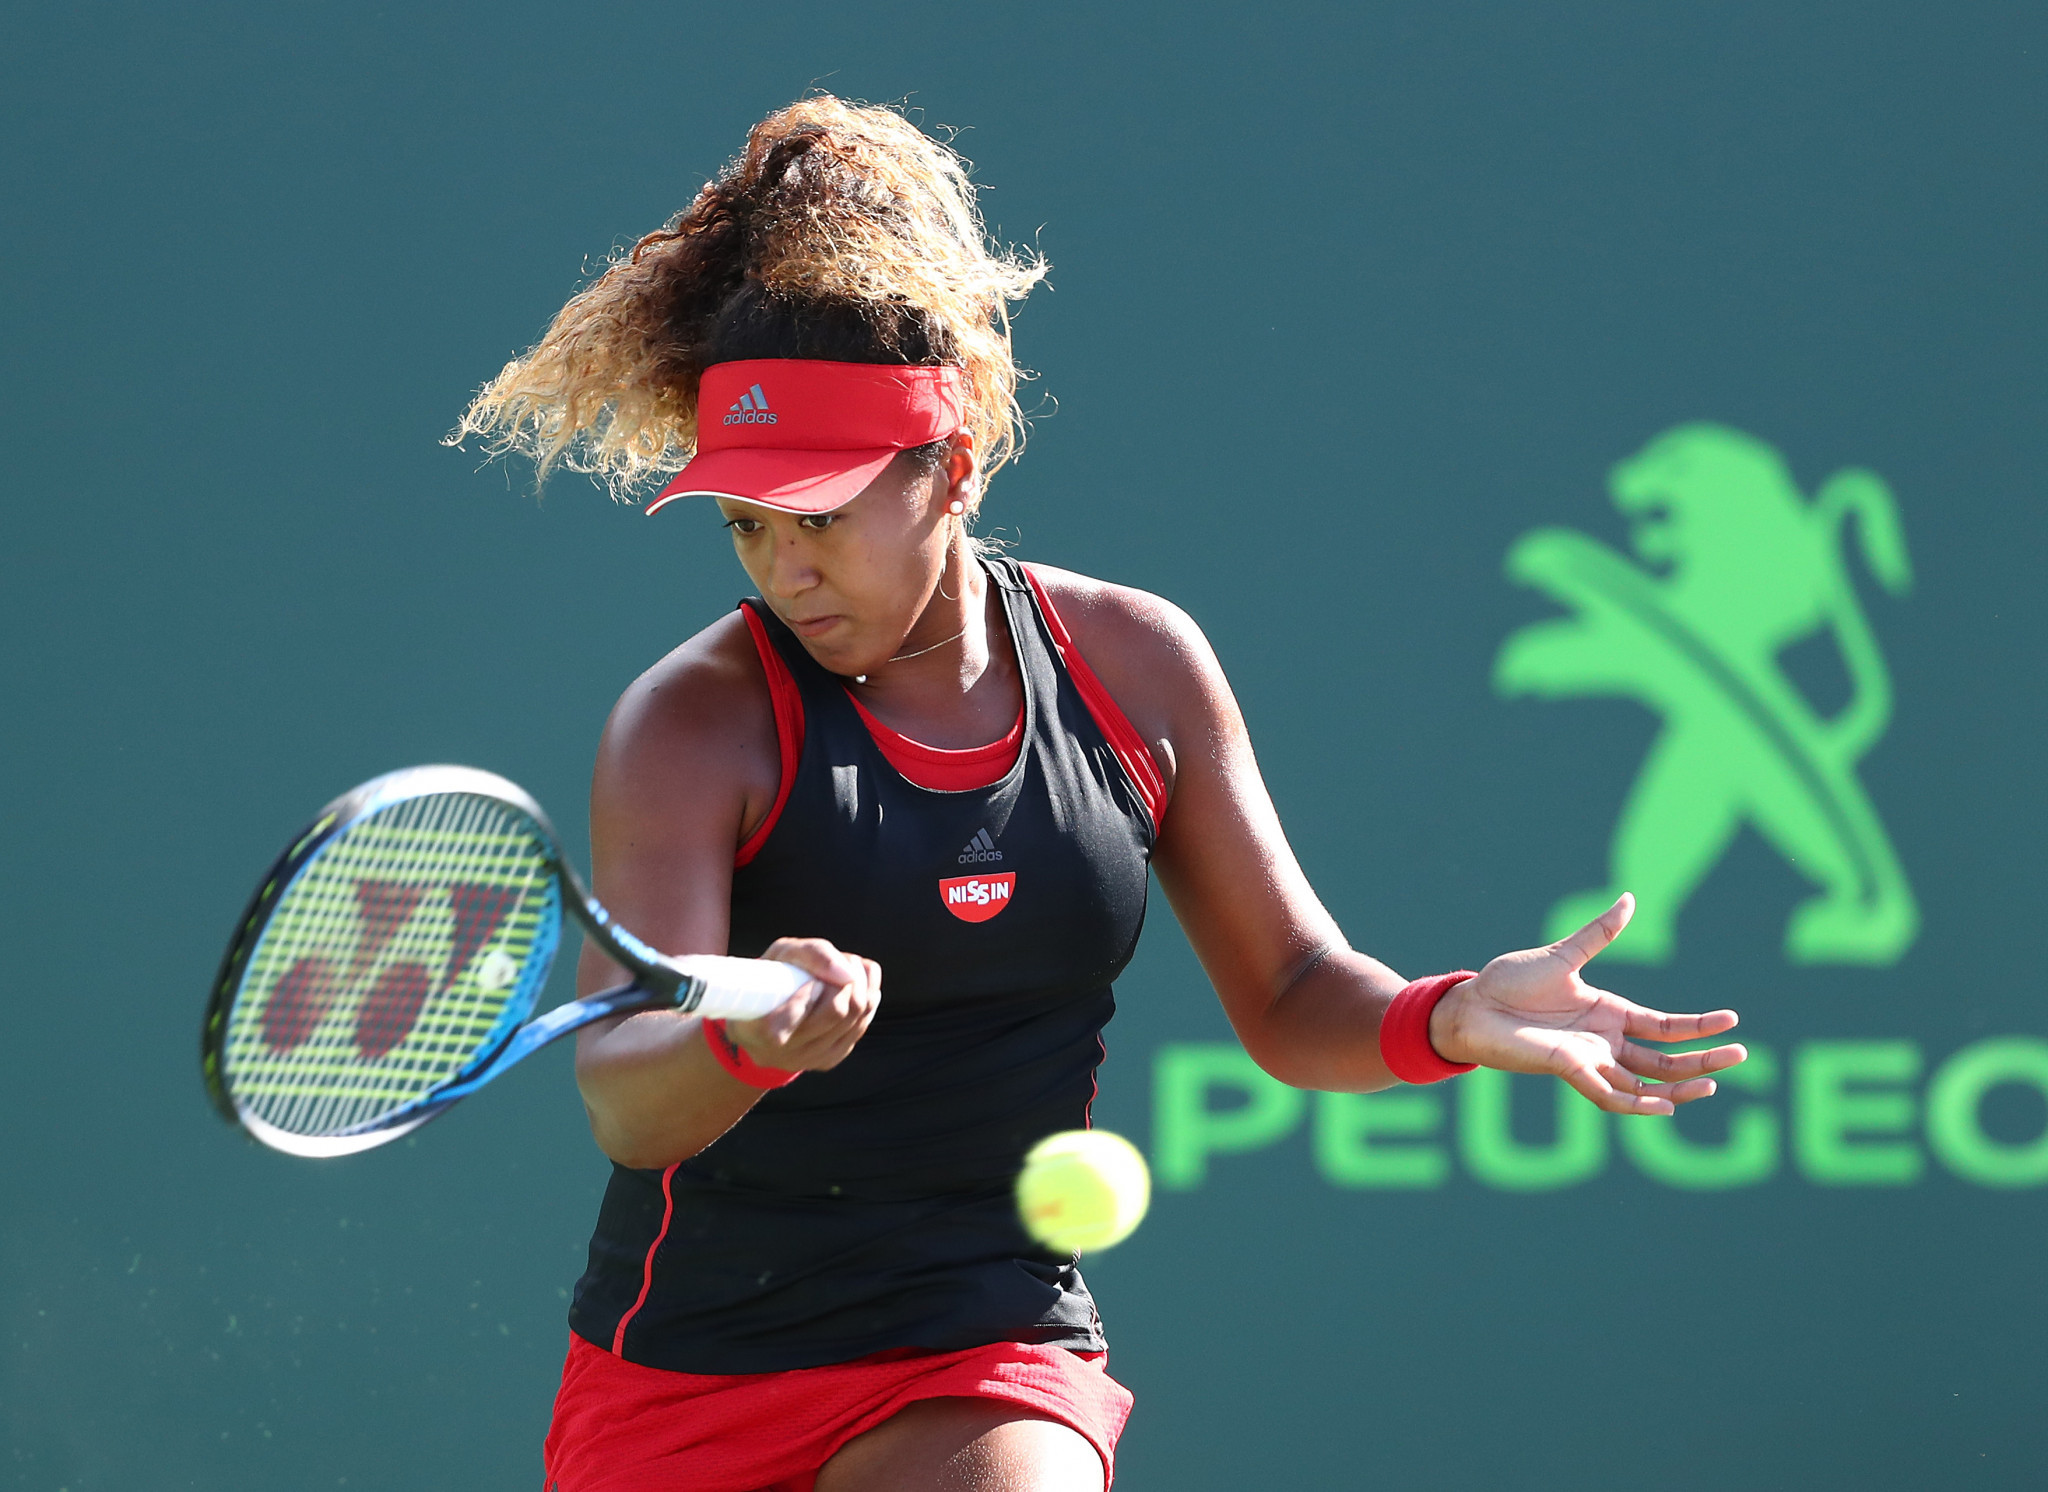 Naomi Osaka knocked out Serena Williams in Miami ©Getty Images